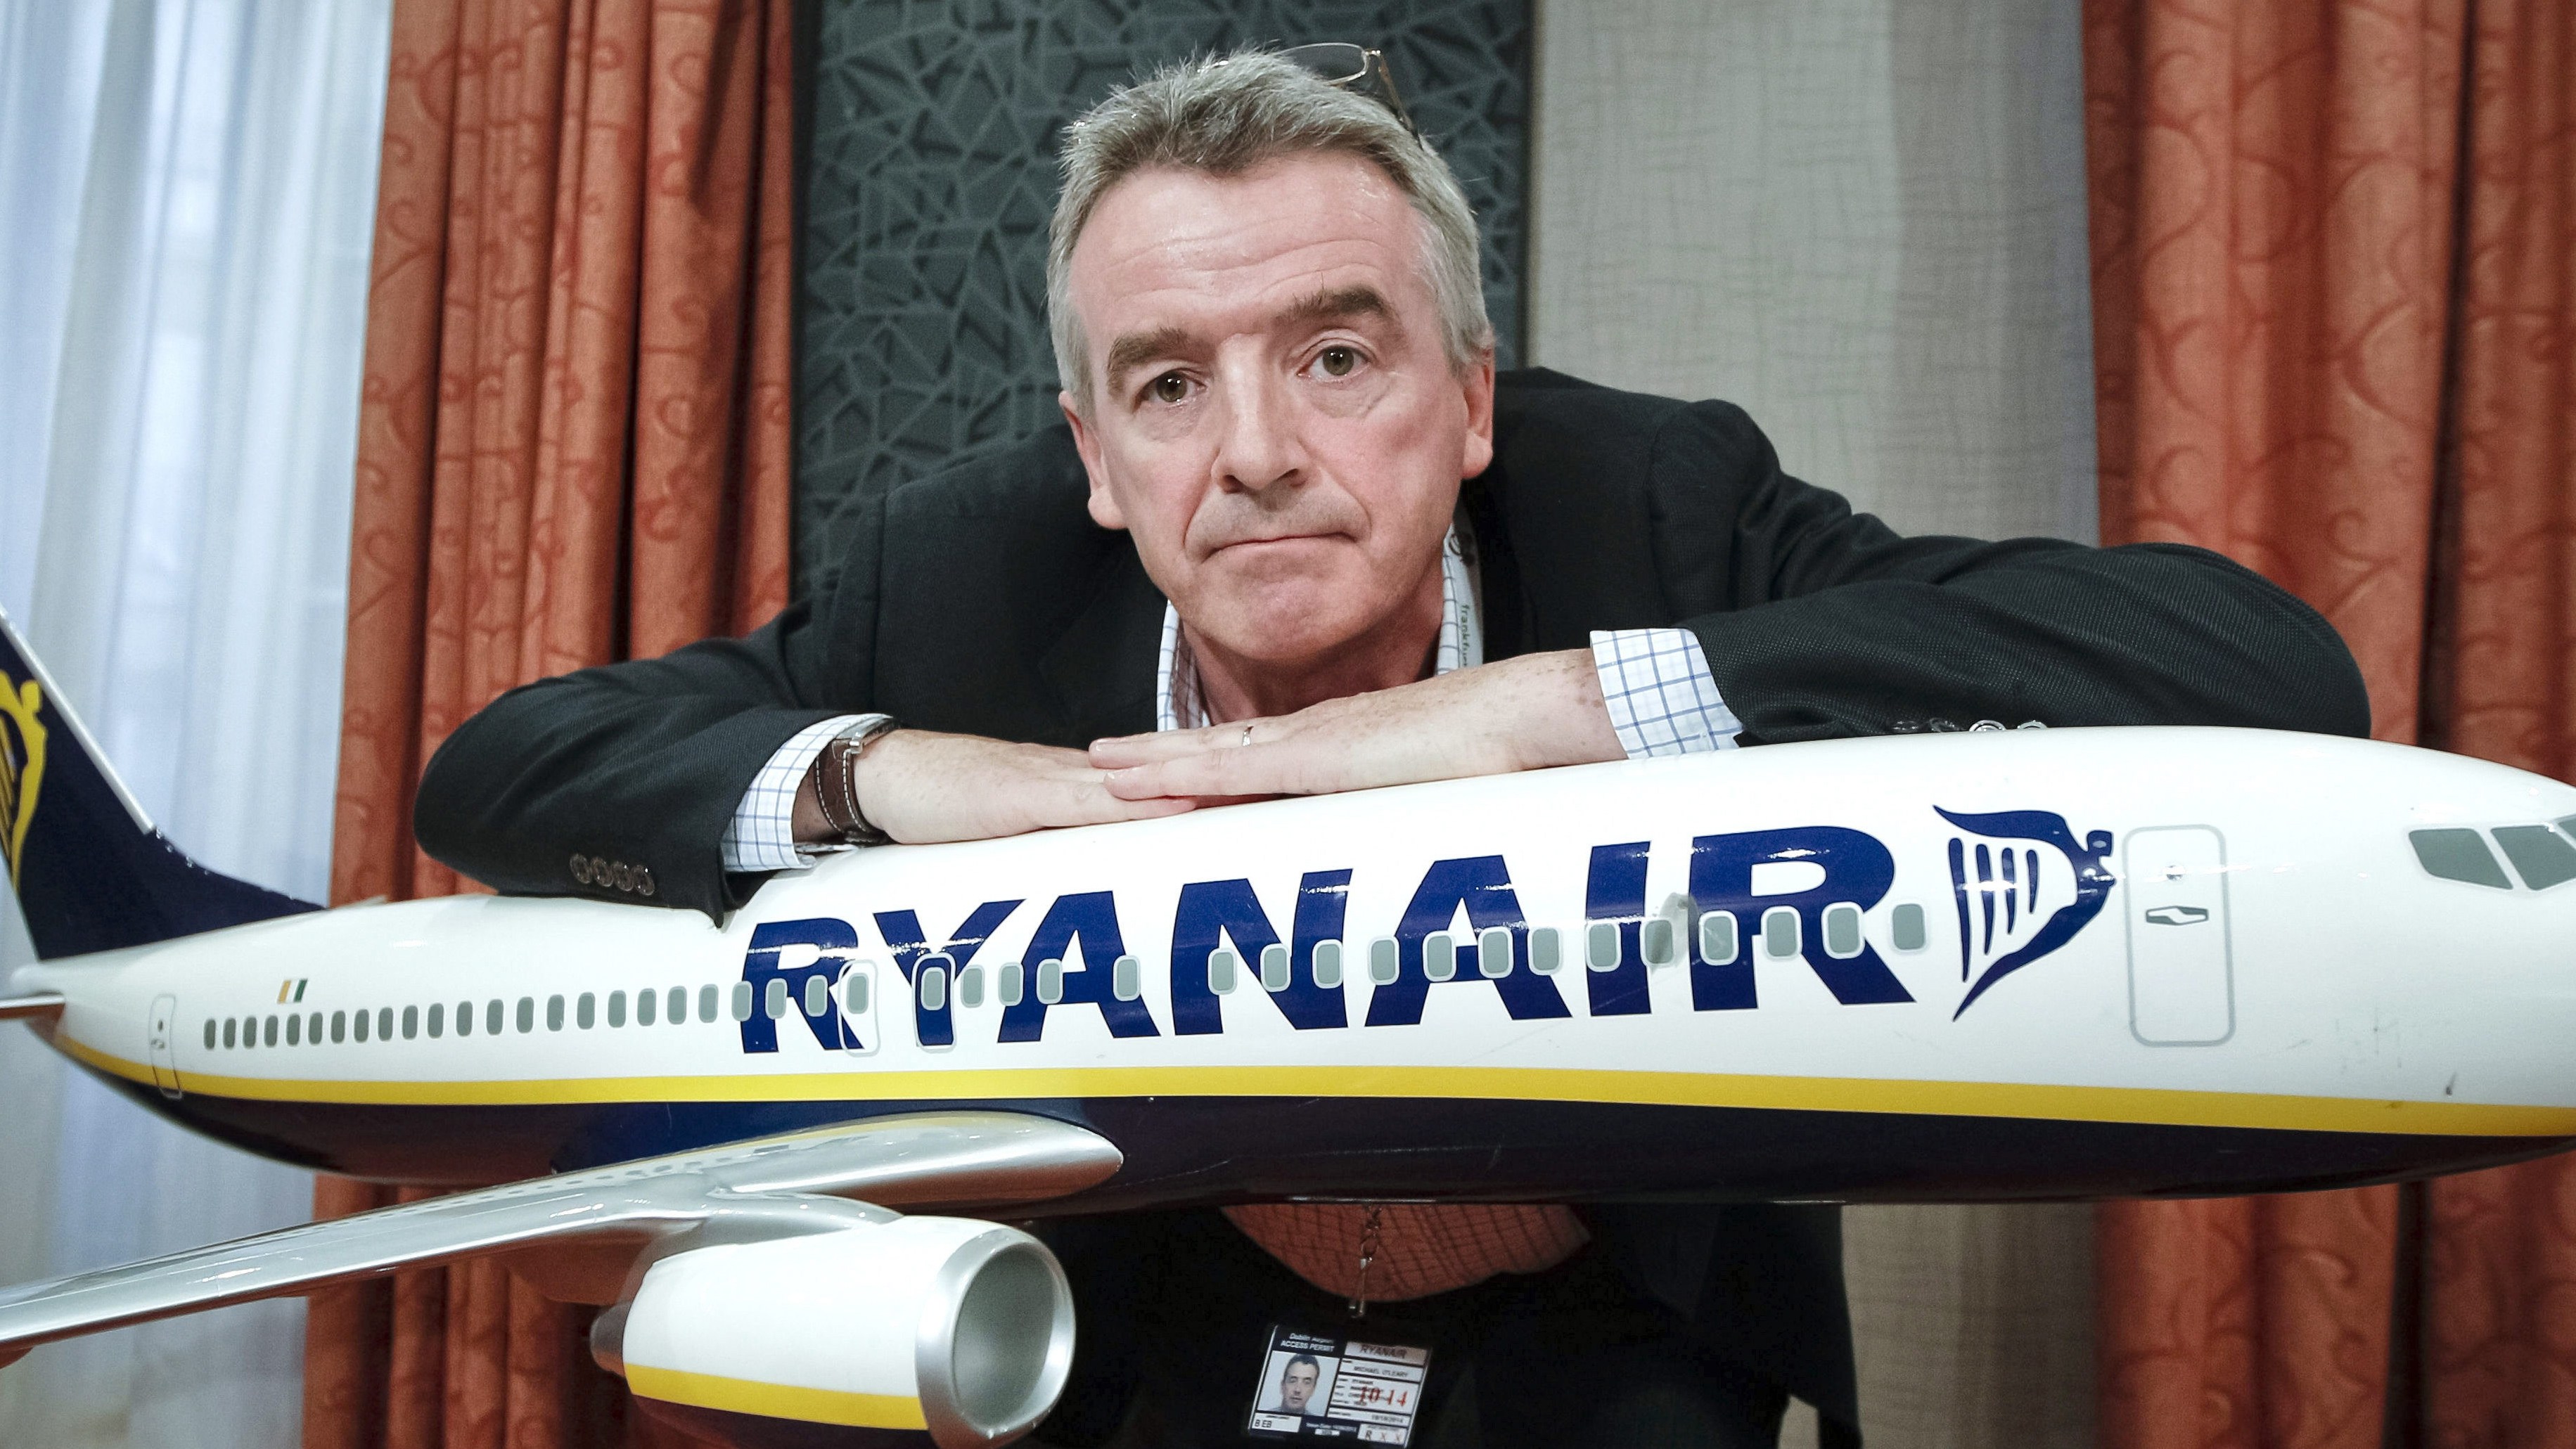 Ryanair’s Michael O’Leary: ‘I hate holidays’